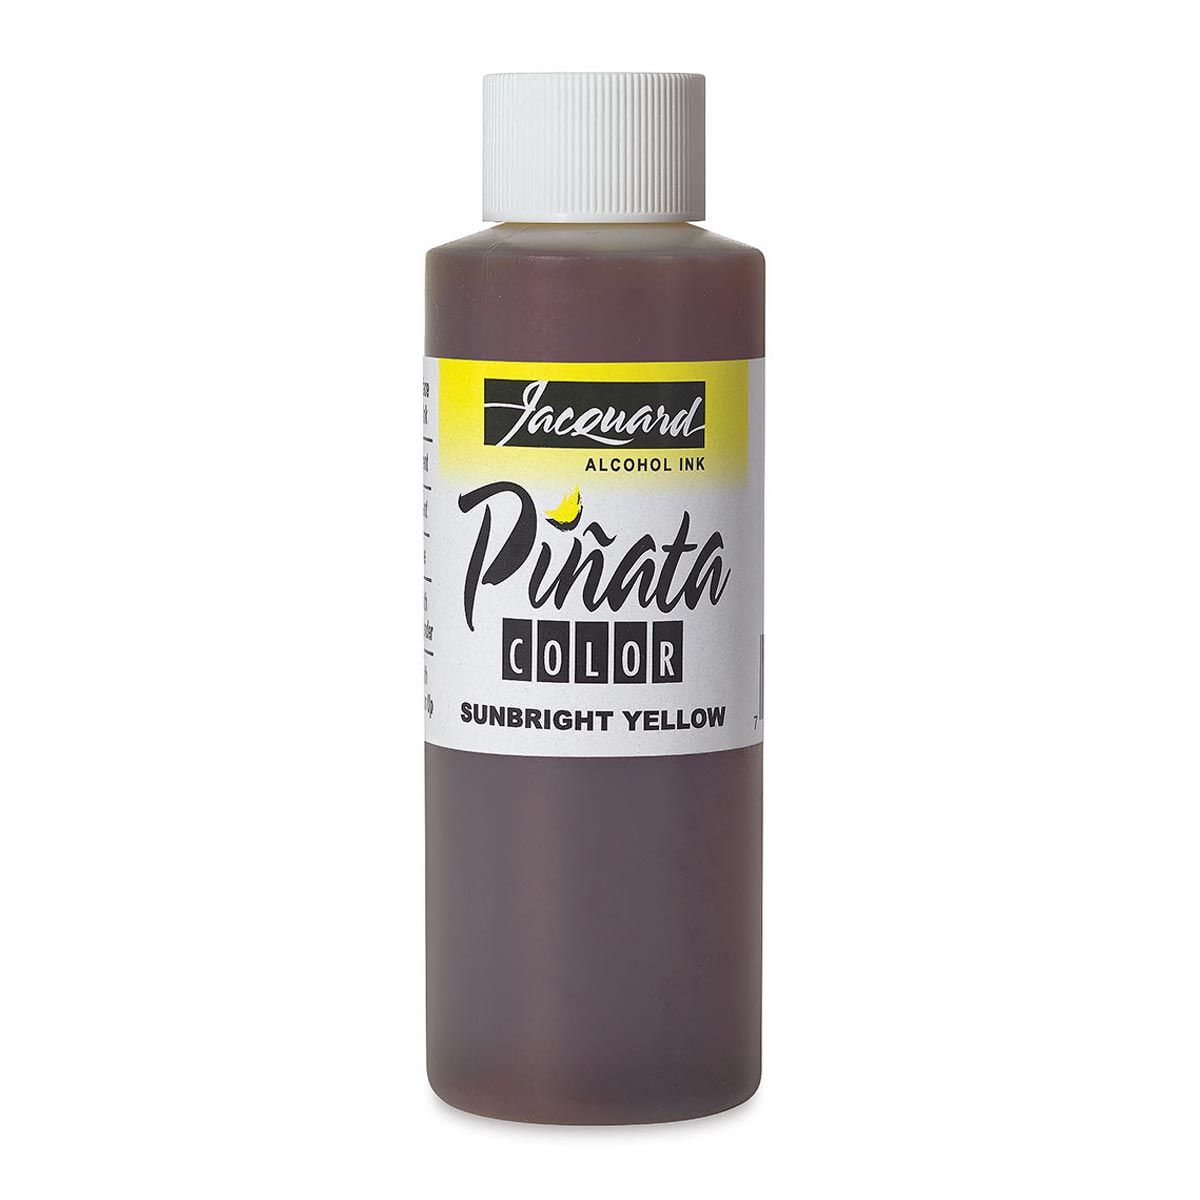 Piñata Color Alcohol Ink - Sunbright Yellow 4-ounce